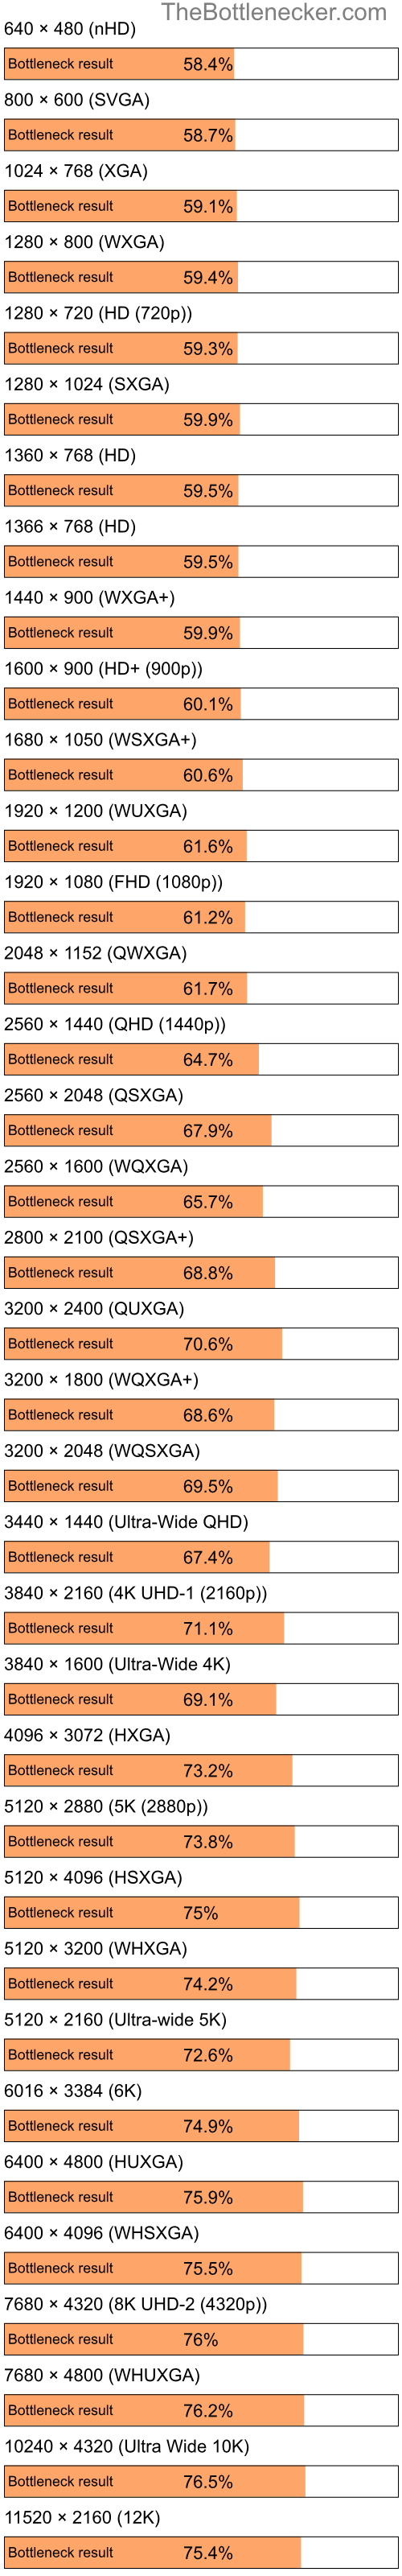 Bottleneck results by resolution for Intel Atom N280 and AMD Radeon X1600 Pro in Processor Intense Tasks